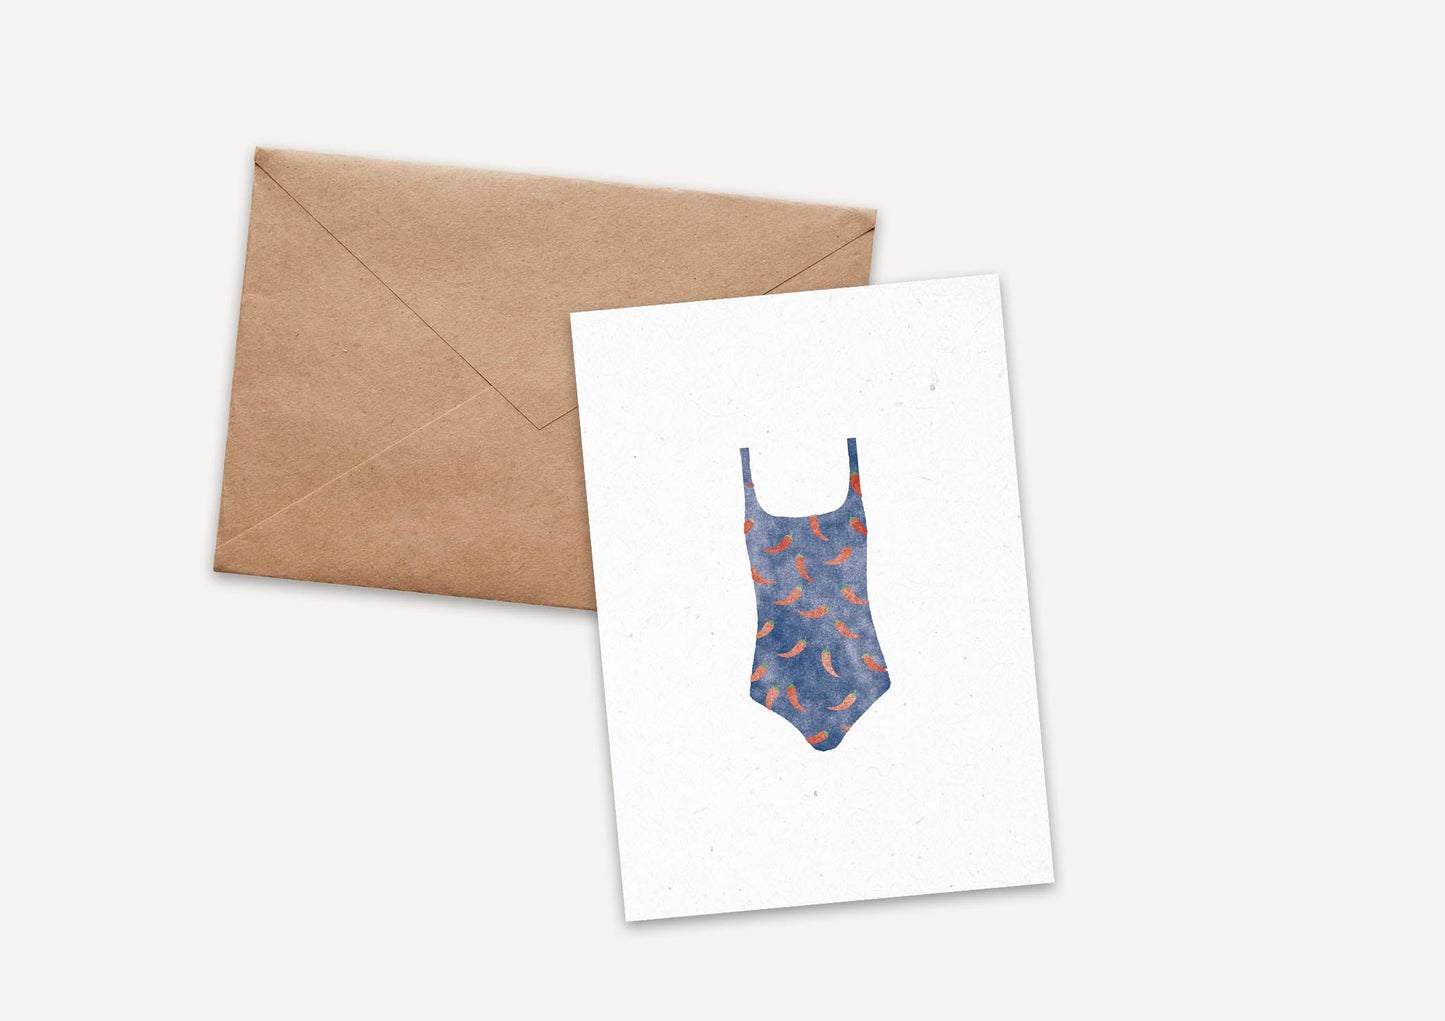 Budgy Smuggler Cards and Post Card